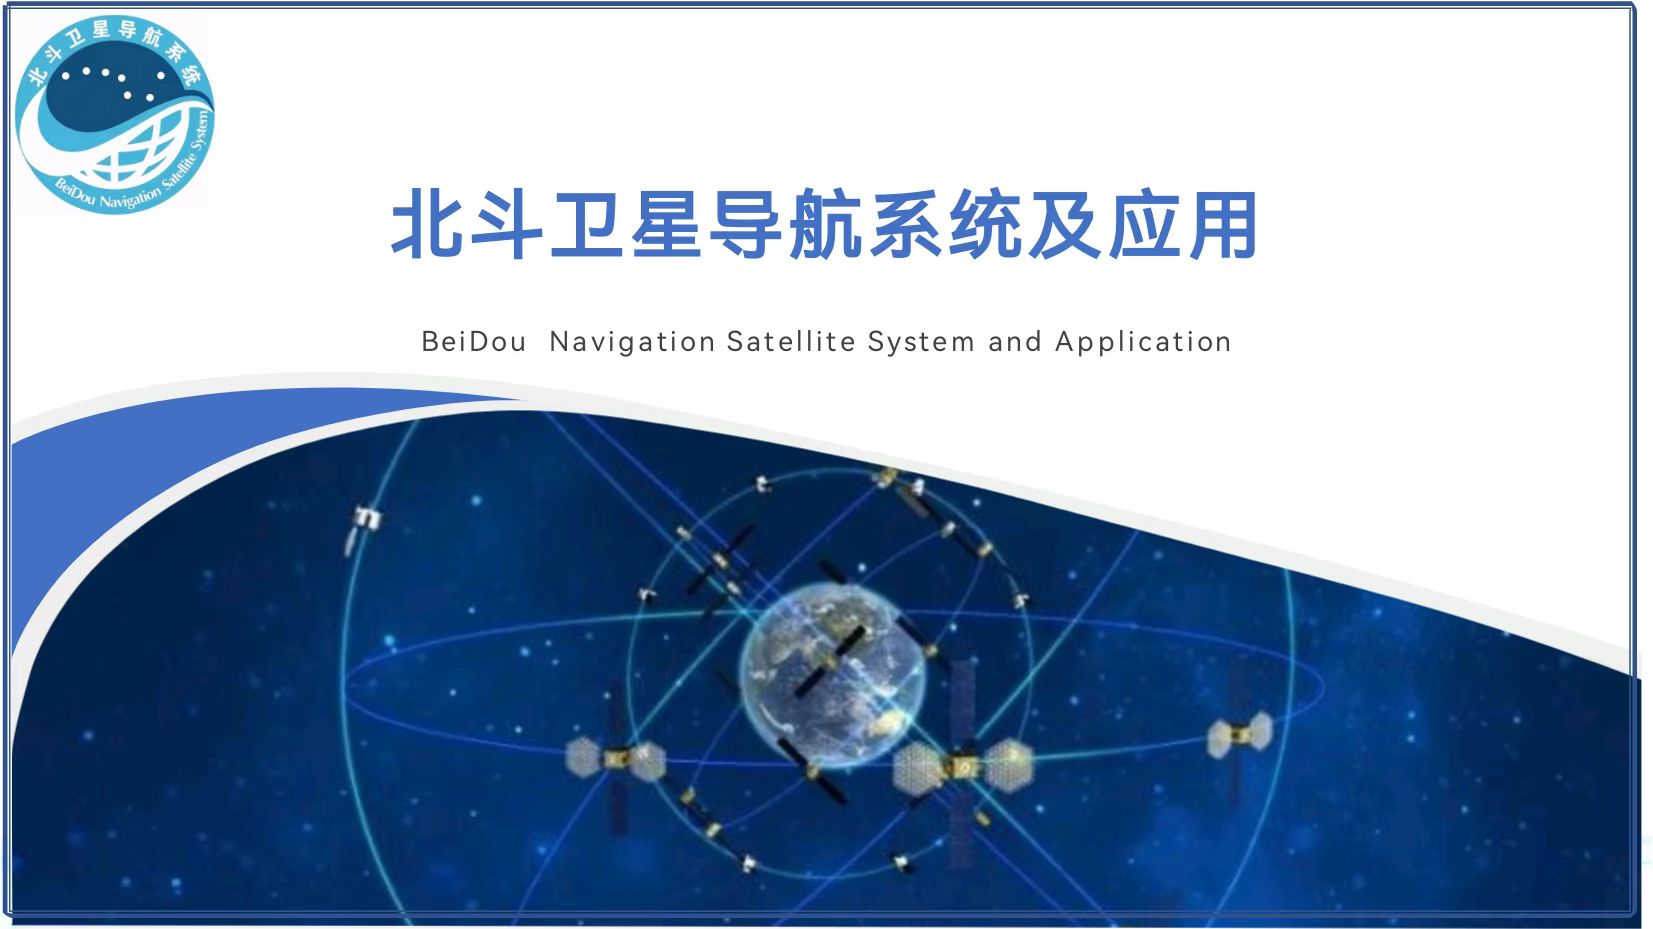 BeiDou Navigation Satellite System and Application